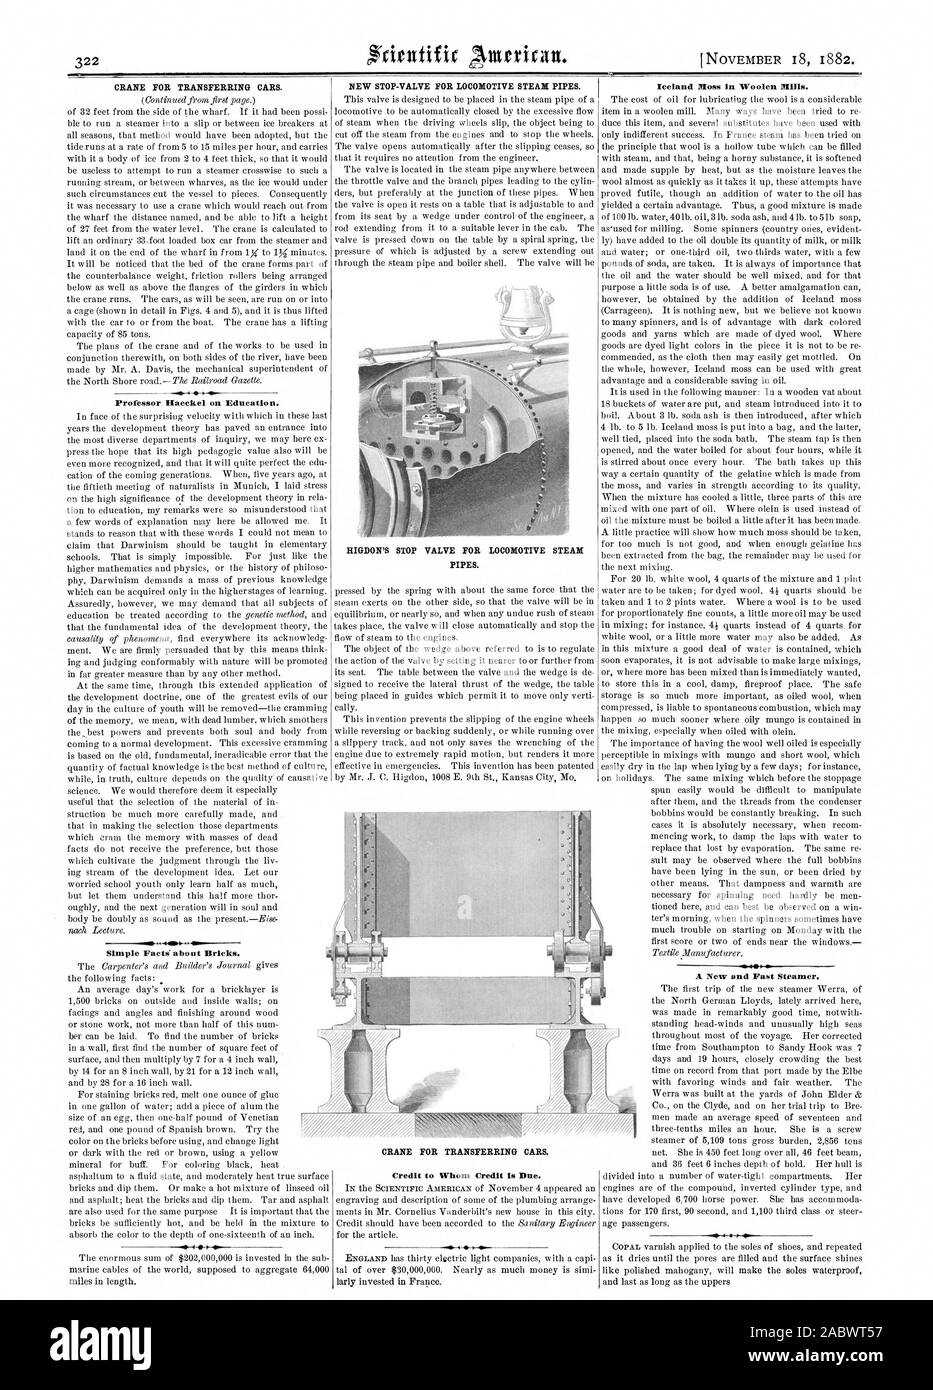 Professor litteckel on Education. Simple Facts about Bricks. HIGDON'S STOP VALVE FOR LOCOMOTIVE STEAM PIPES. Iceland Moss in Woolen Mills. A New and Fast Steamer. CRANE FOR TRANSFERRING CARS, scientific american, 1882-11-18 Stock Photo